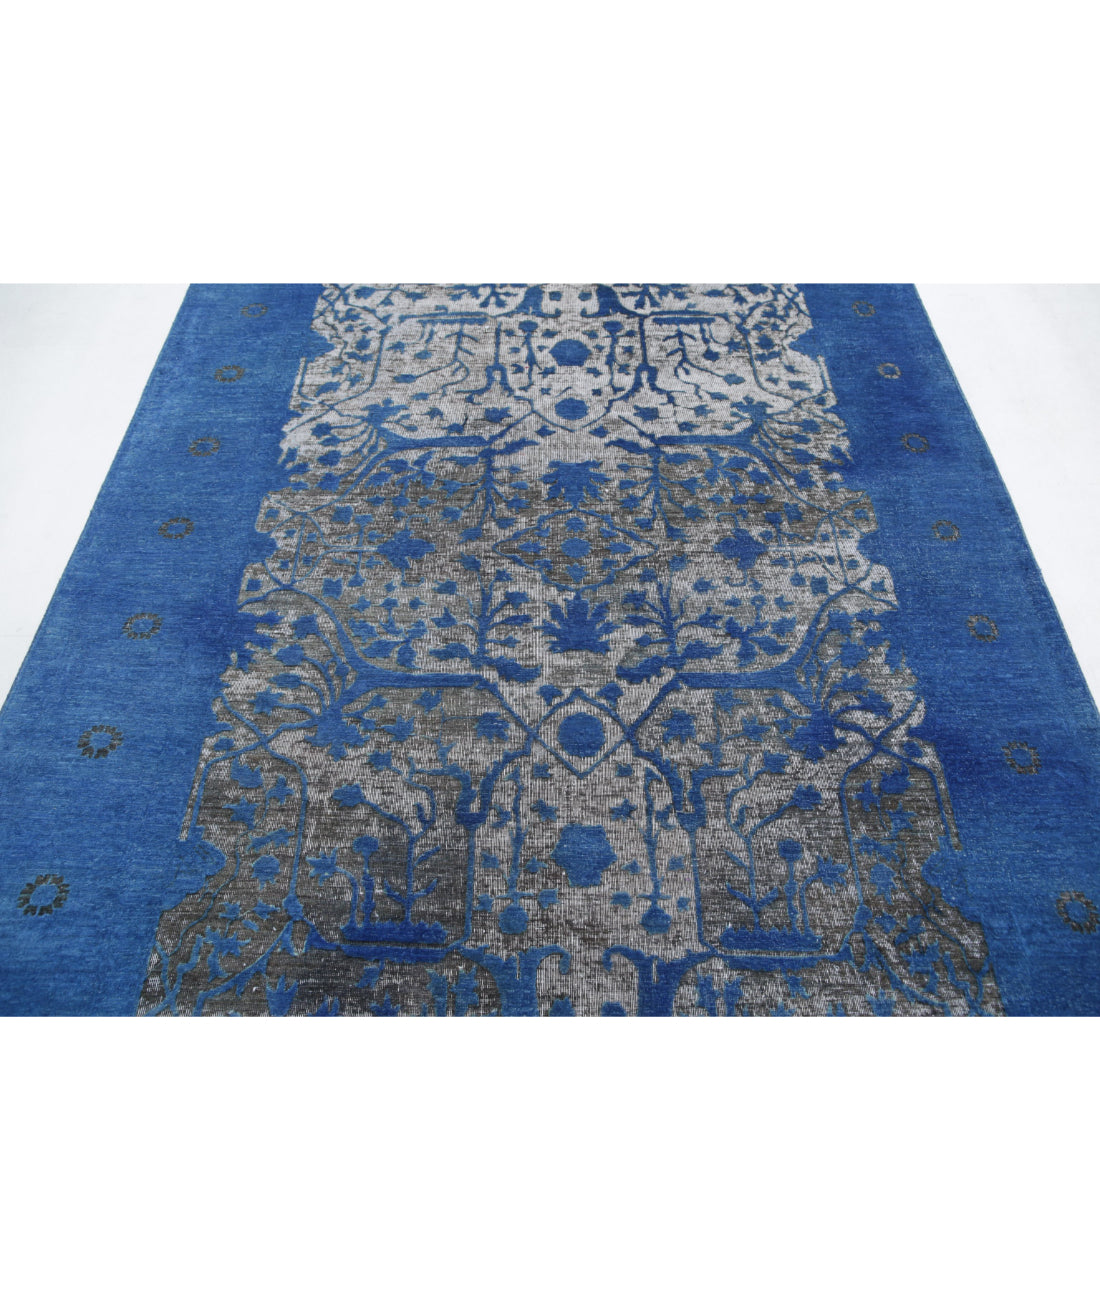 Hand Knotted Onyx Wool Rug - 5'11'' x 8'4'' 5'11'' x 8'4'' (178 X 250) / Blue / Blue